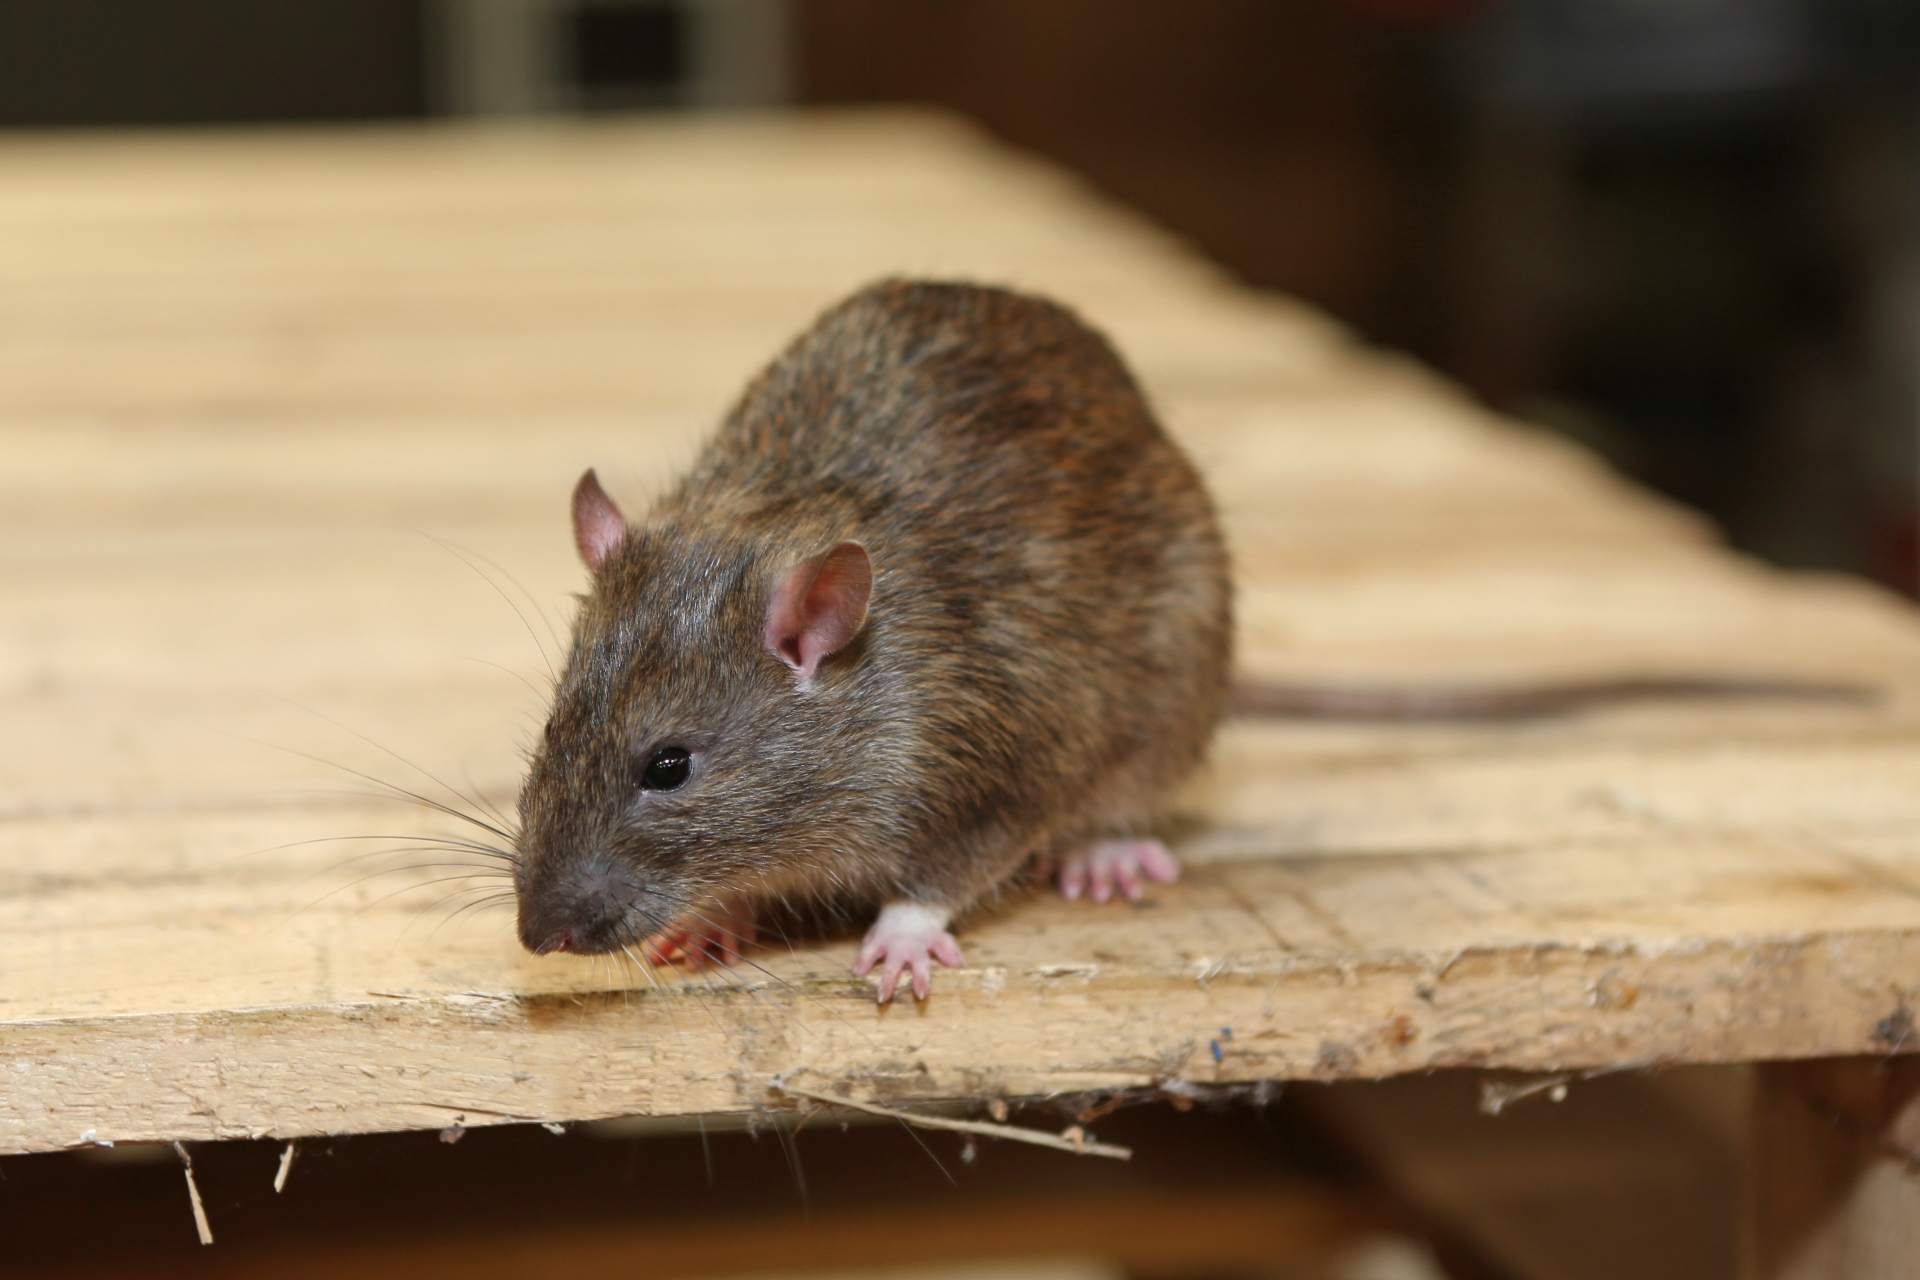 Rat extermination, Pest Control in Stamford Hill, Stoke Newington, N16. Call Now 020 8166 9746